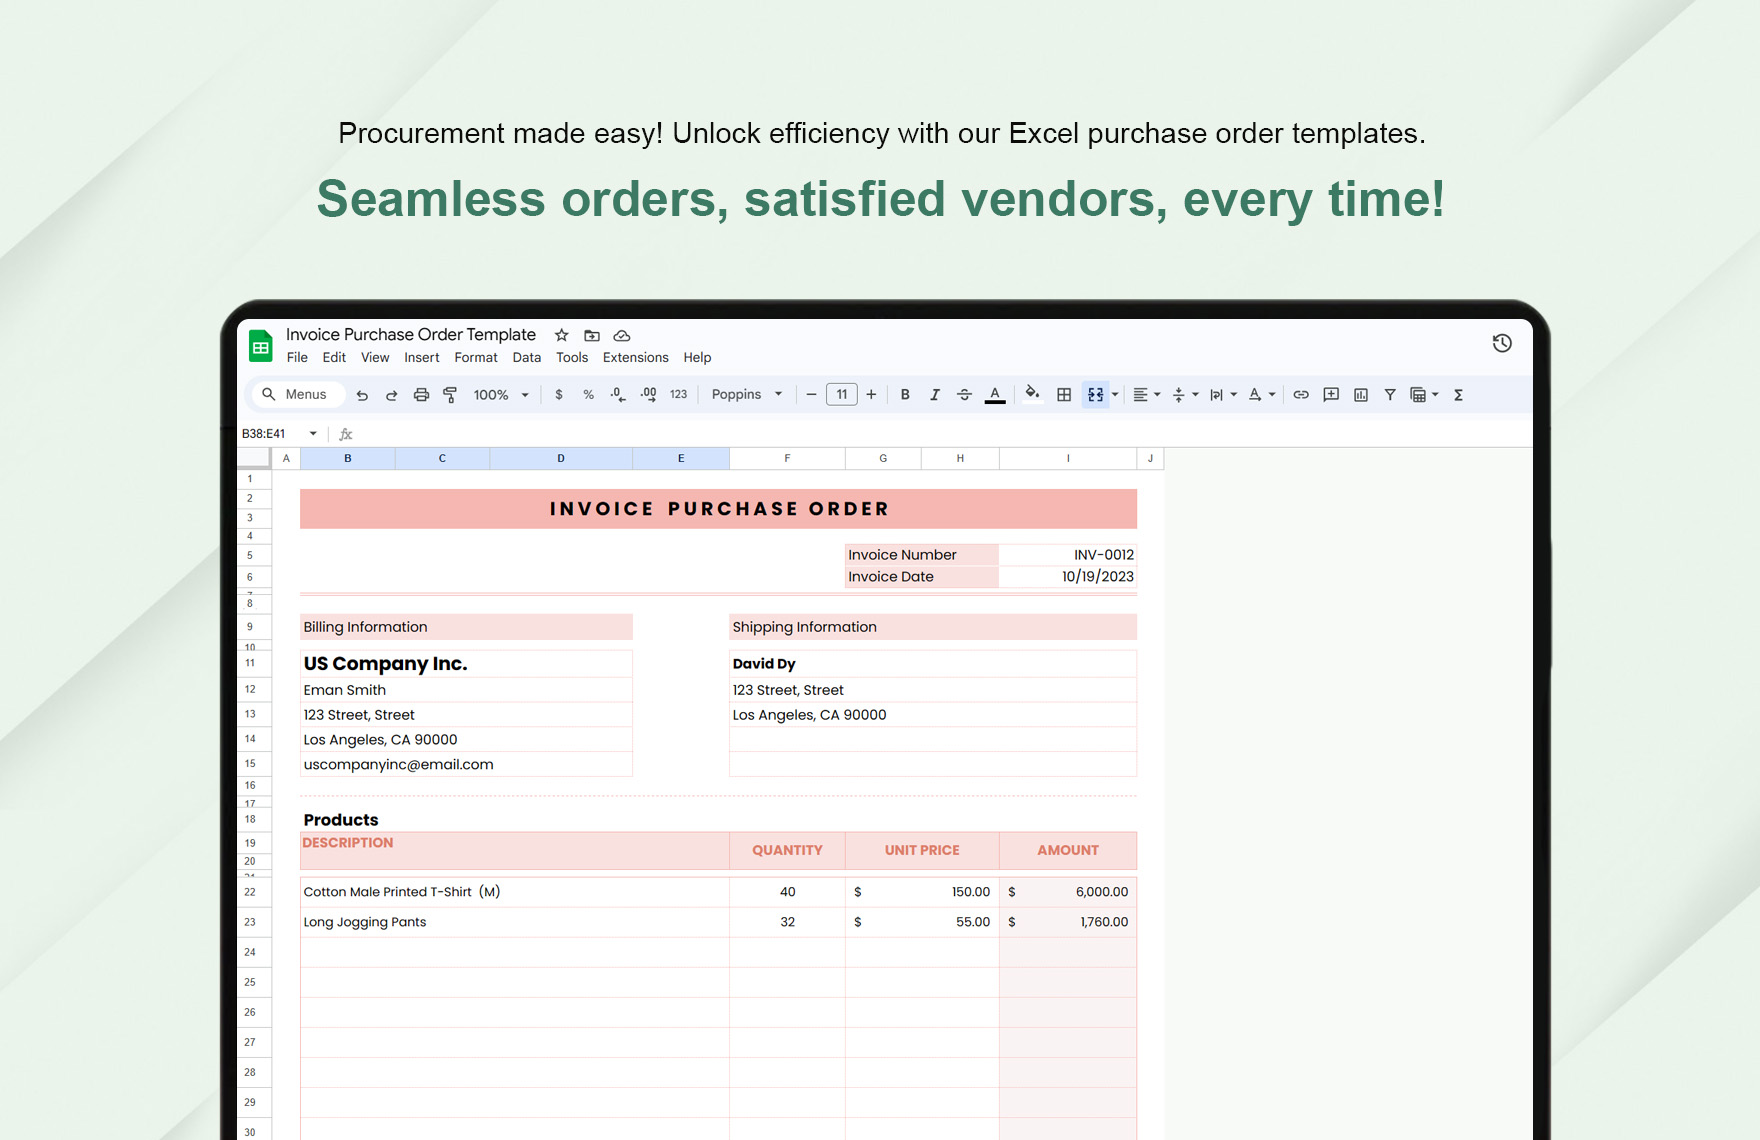 Invoice Purchase Order Template in Excel, Google Sheets - Download ...